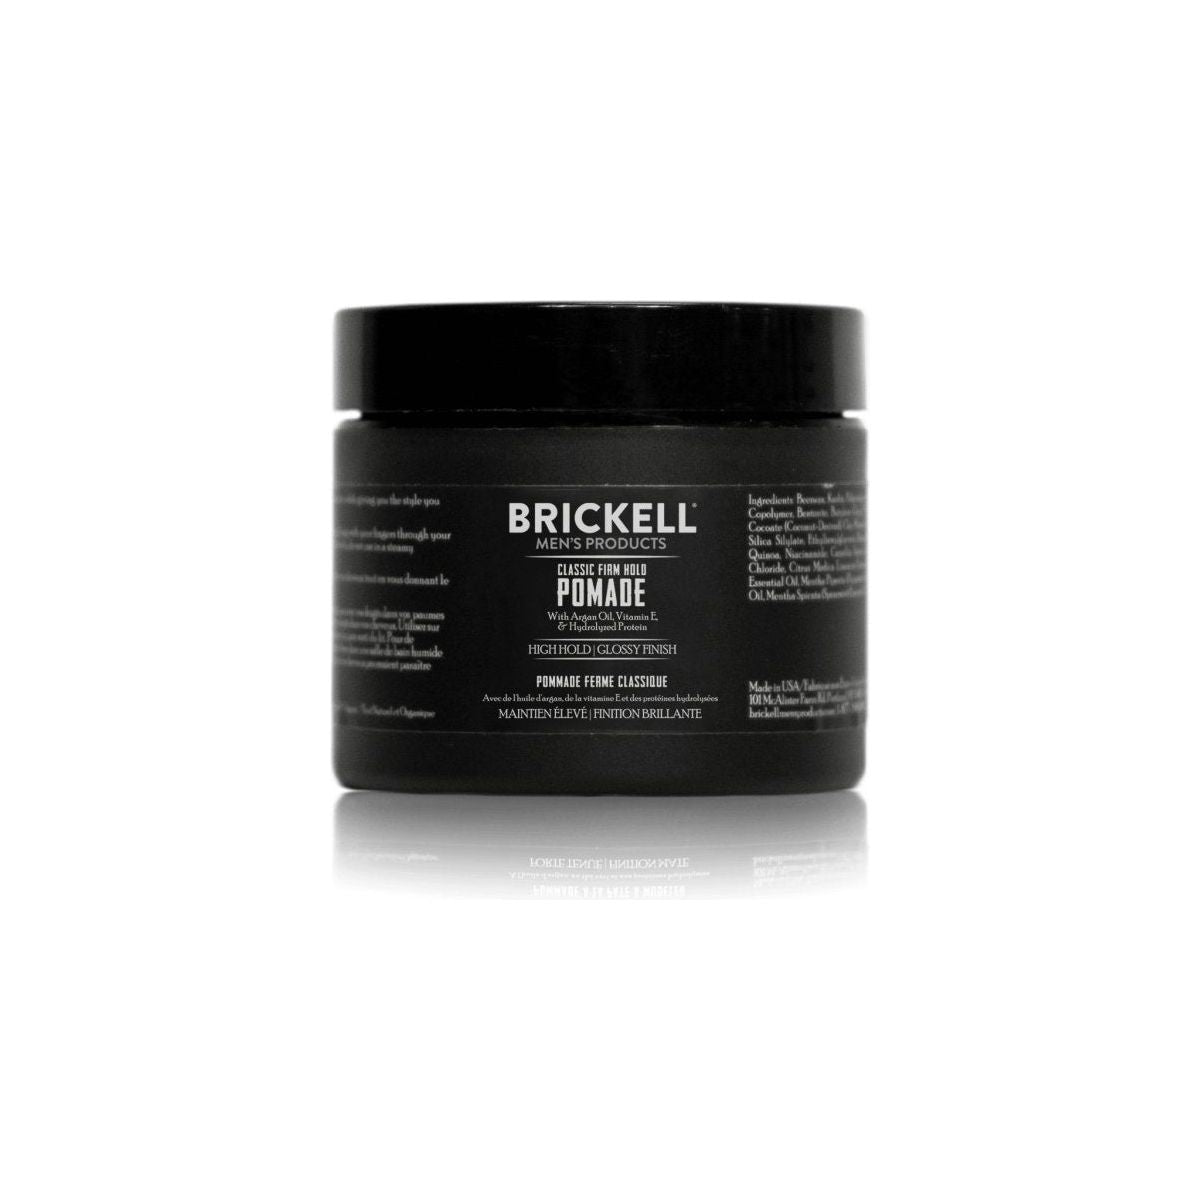 Brickell Classic Firm Hold Pomade - 59ml - Glam Global UK